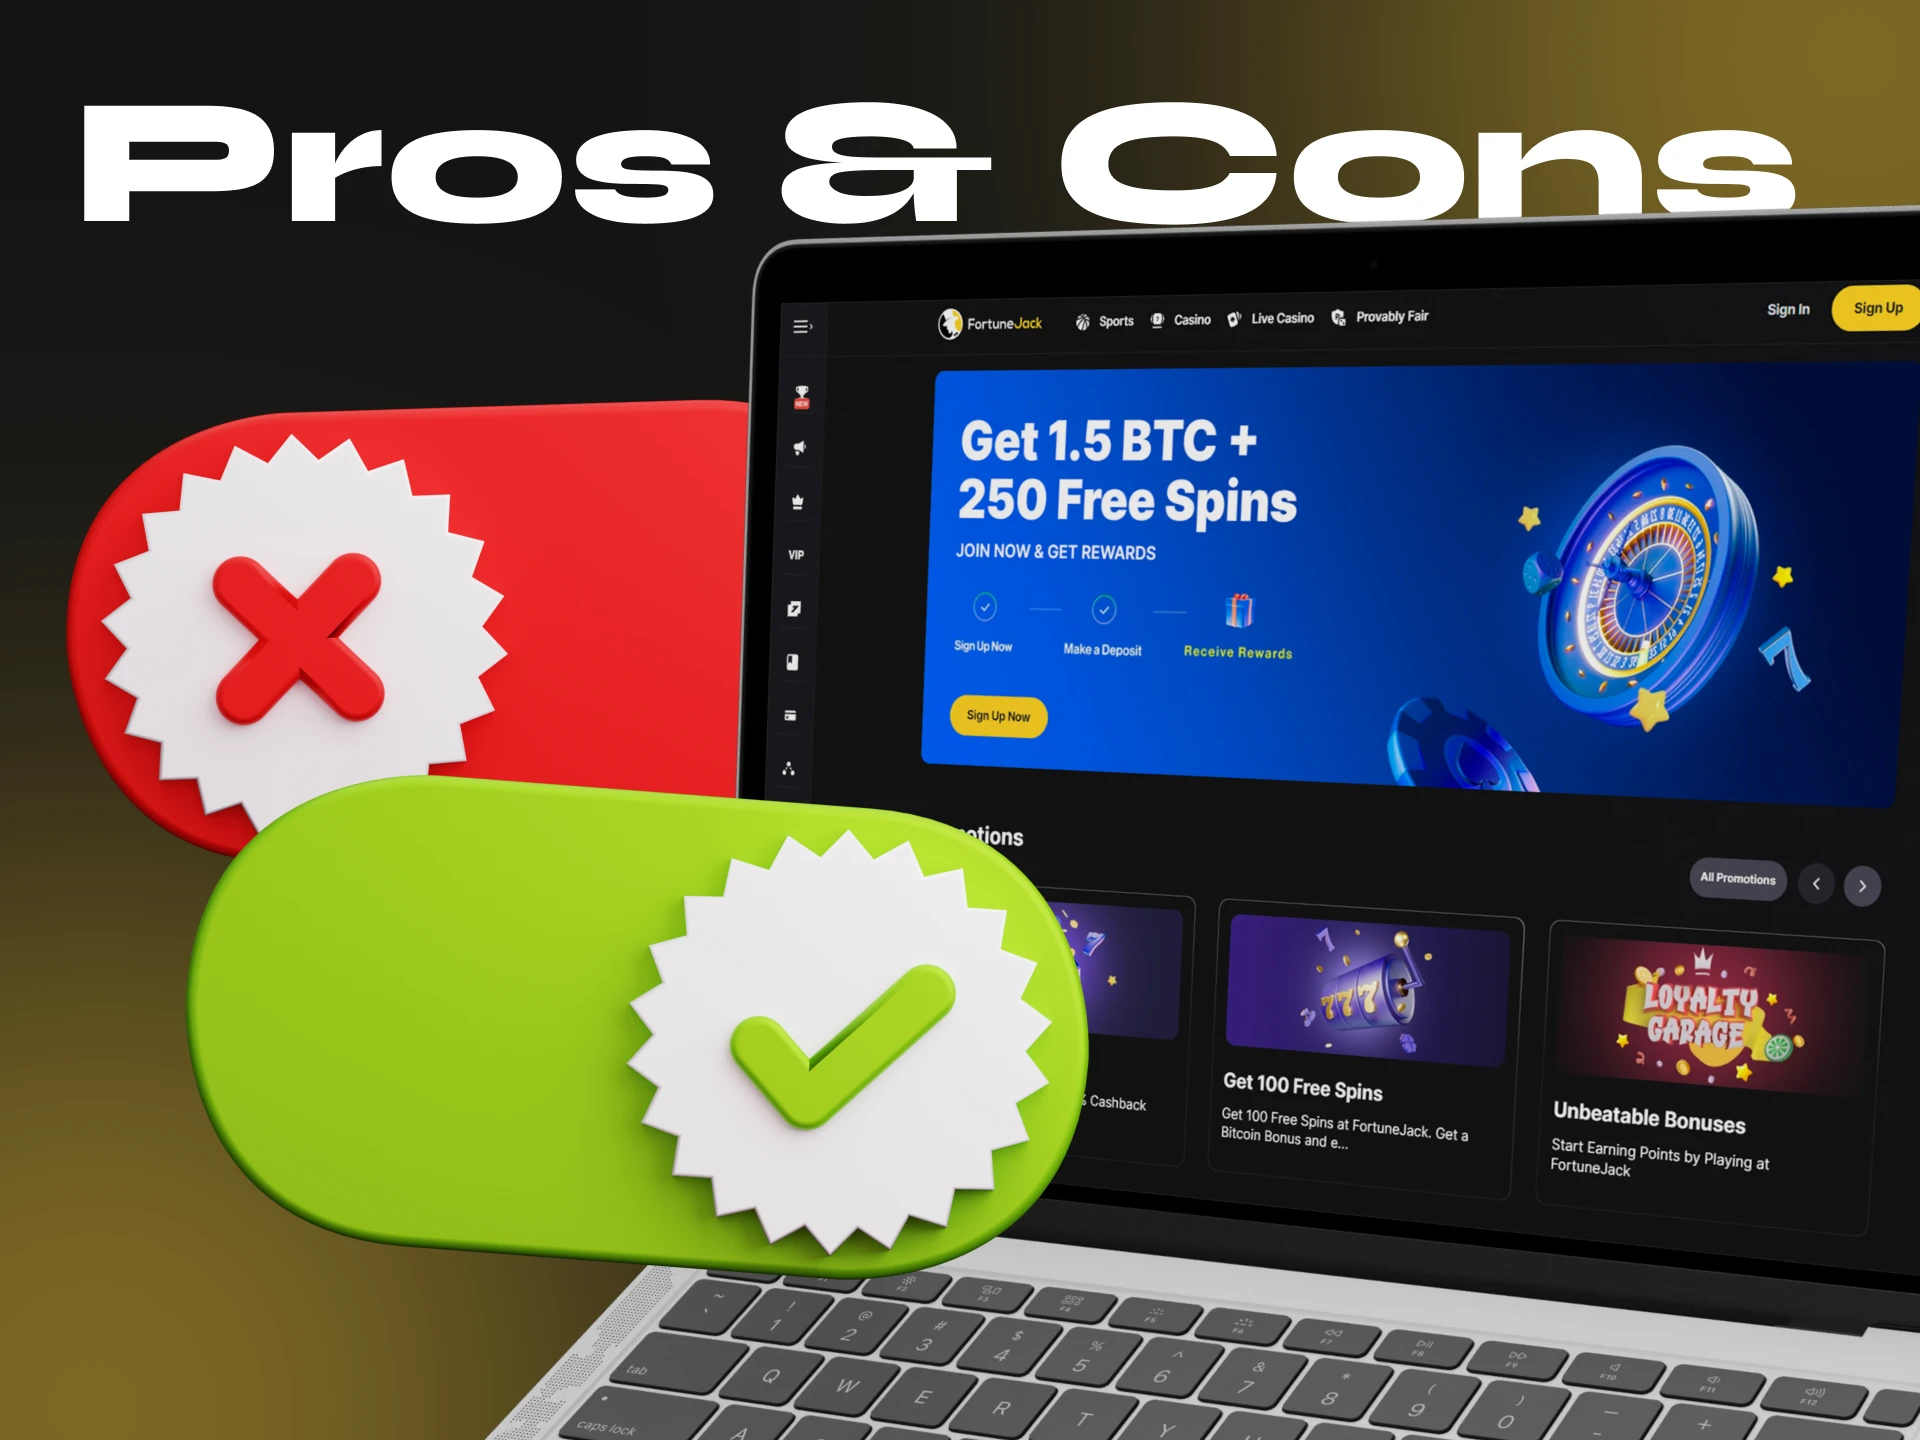 Compare the pros and cons of FortuneJack Casino to make your choice.